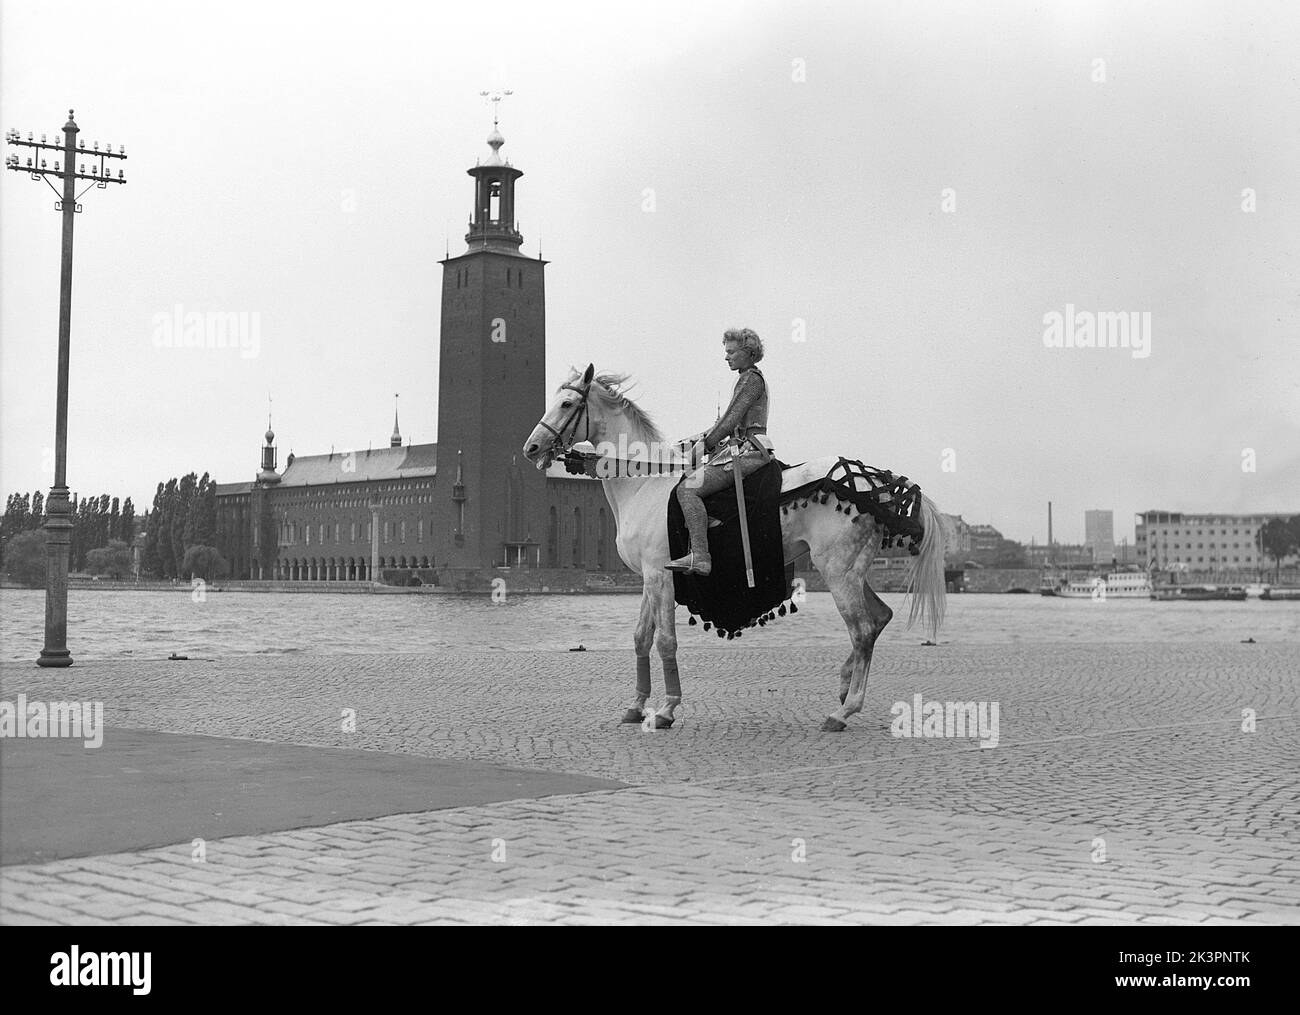 In the 1940s. The american movie Jeanne d'Arc is being promoted for it's premiere screening and Kerstin Bergo was chosen to act as Ingrid Bergman in the pr-stunt. She both looked a bit like Ingrid Bergman and could ride. In the background Stockholm city hall.  Stockholm Sweden 1949. Kristoffersson ref AO17-8 Stock Photo